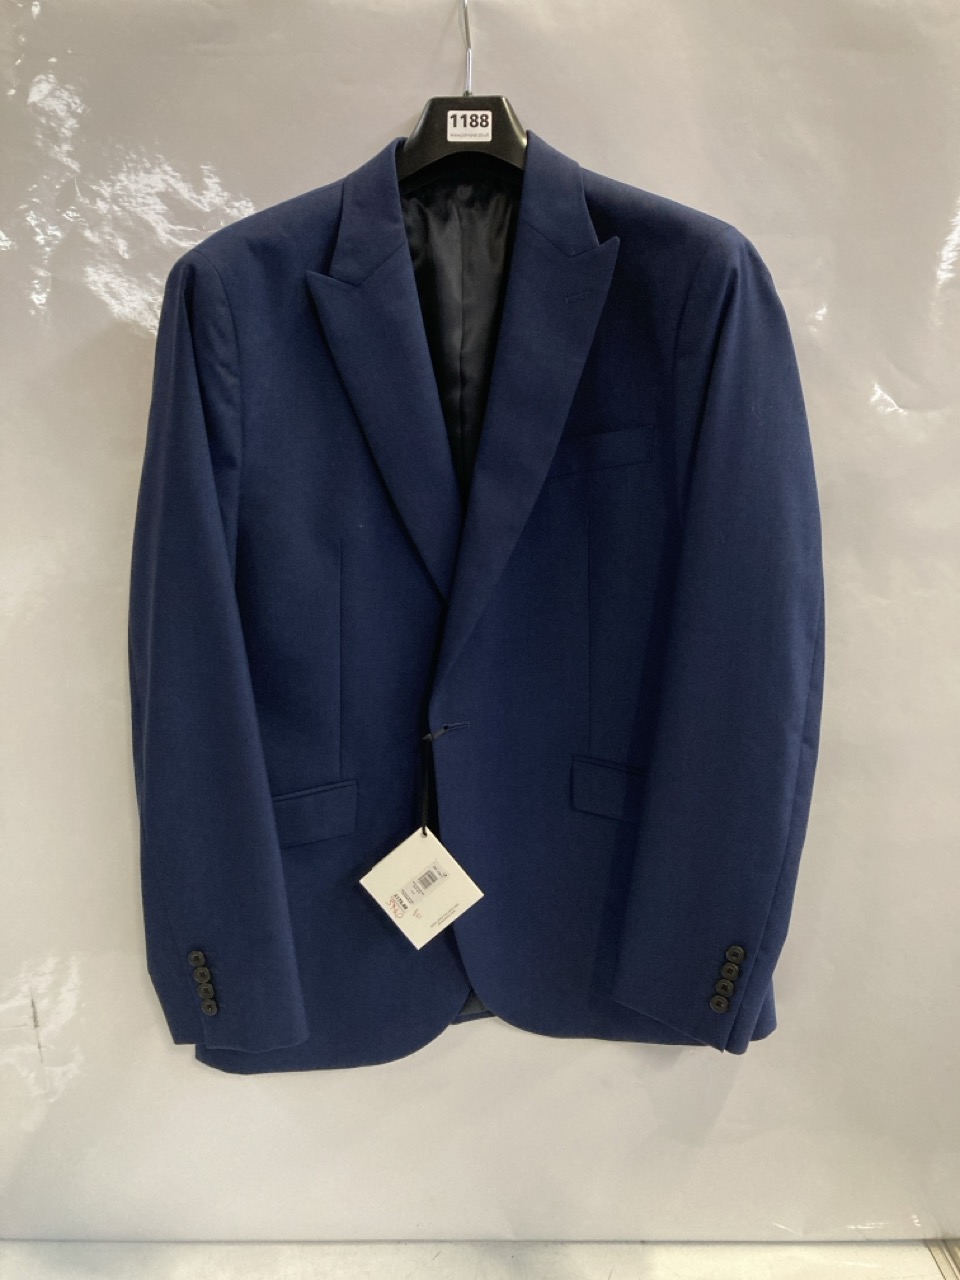 3 X MEN'S SUIT JACKETS TO INCLUDE JOHN LEWIS WOOL MOHAIR IN BLUE 44R